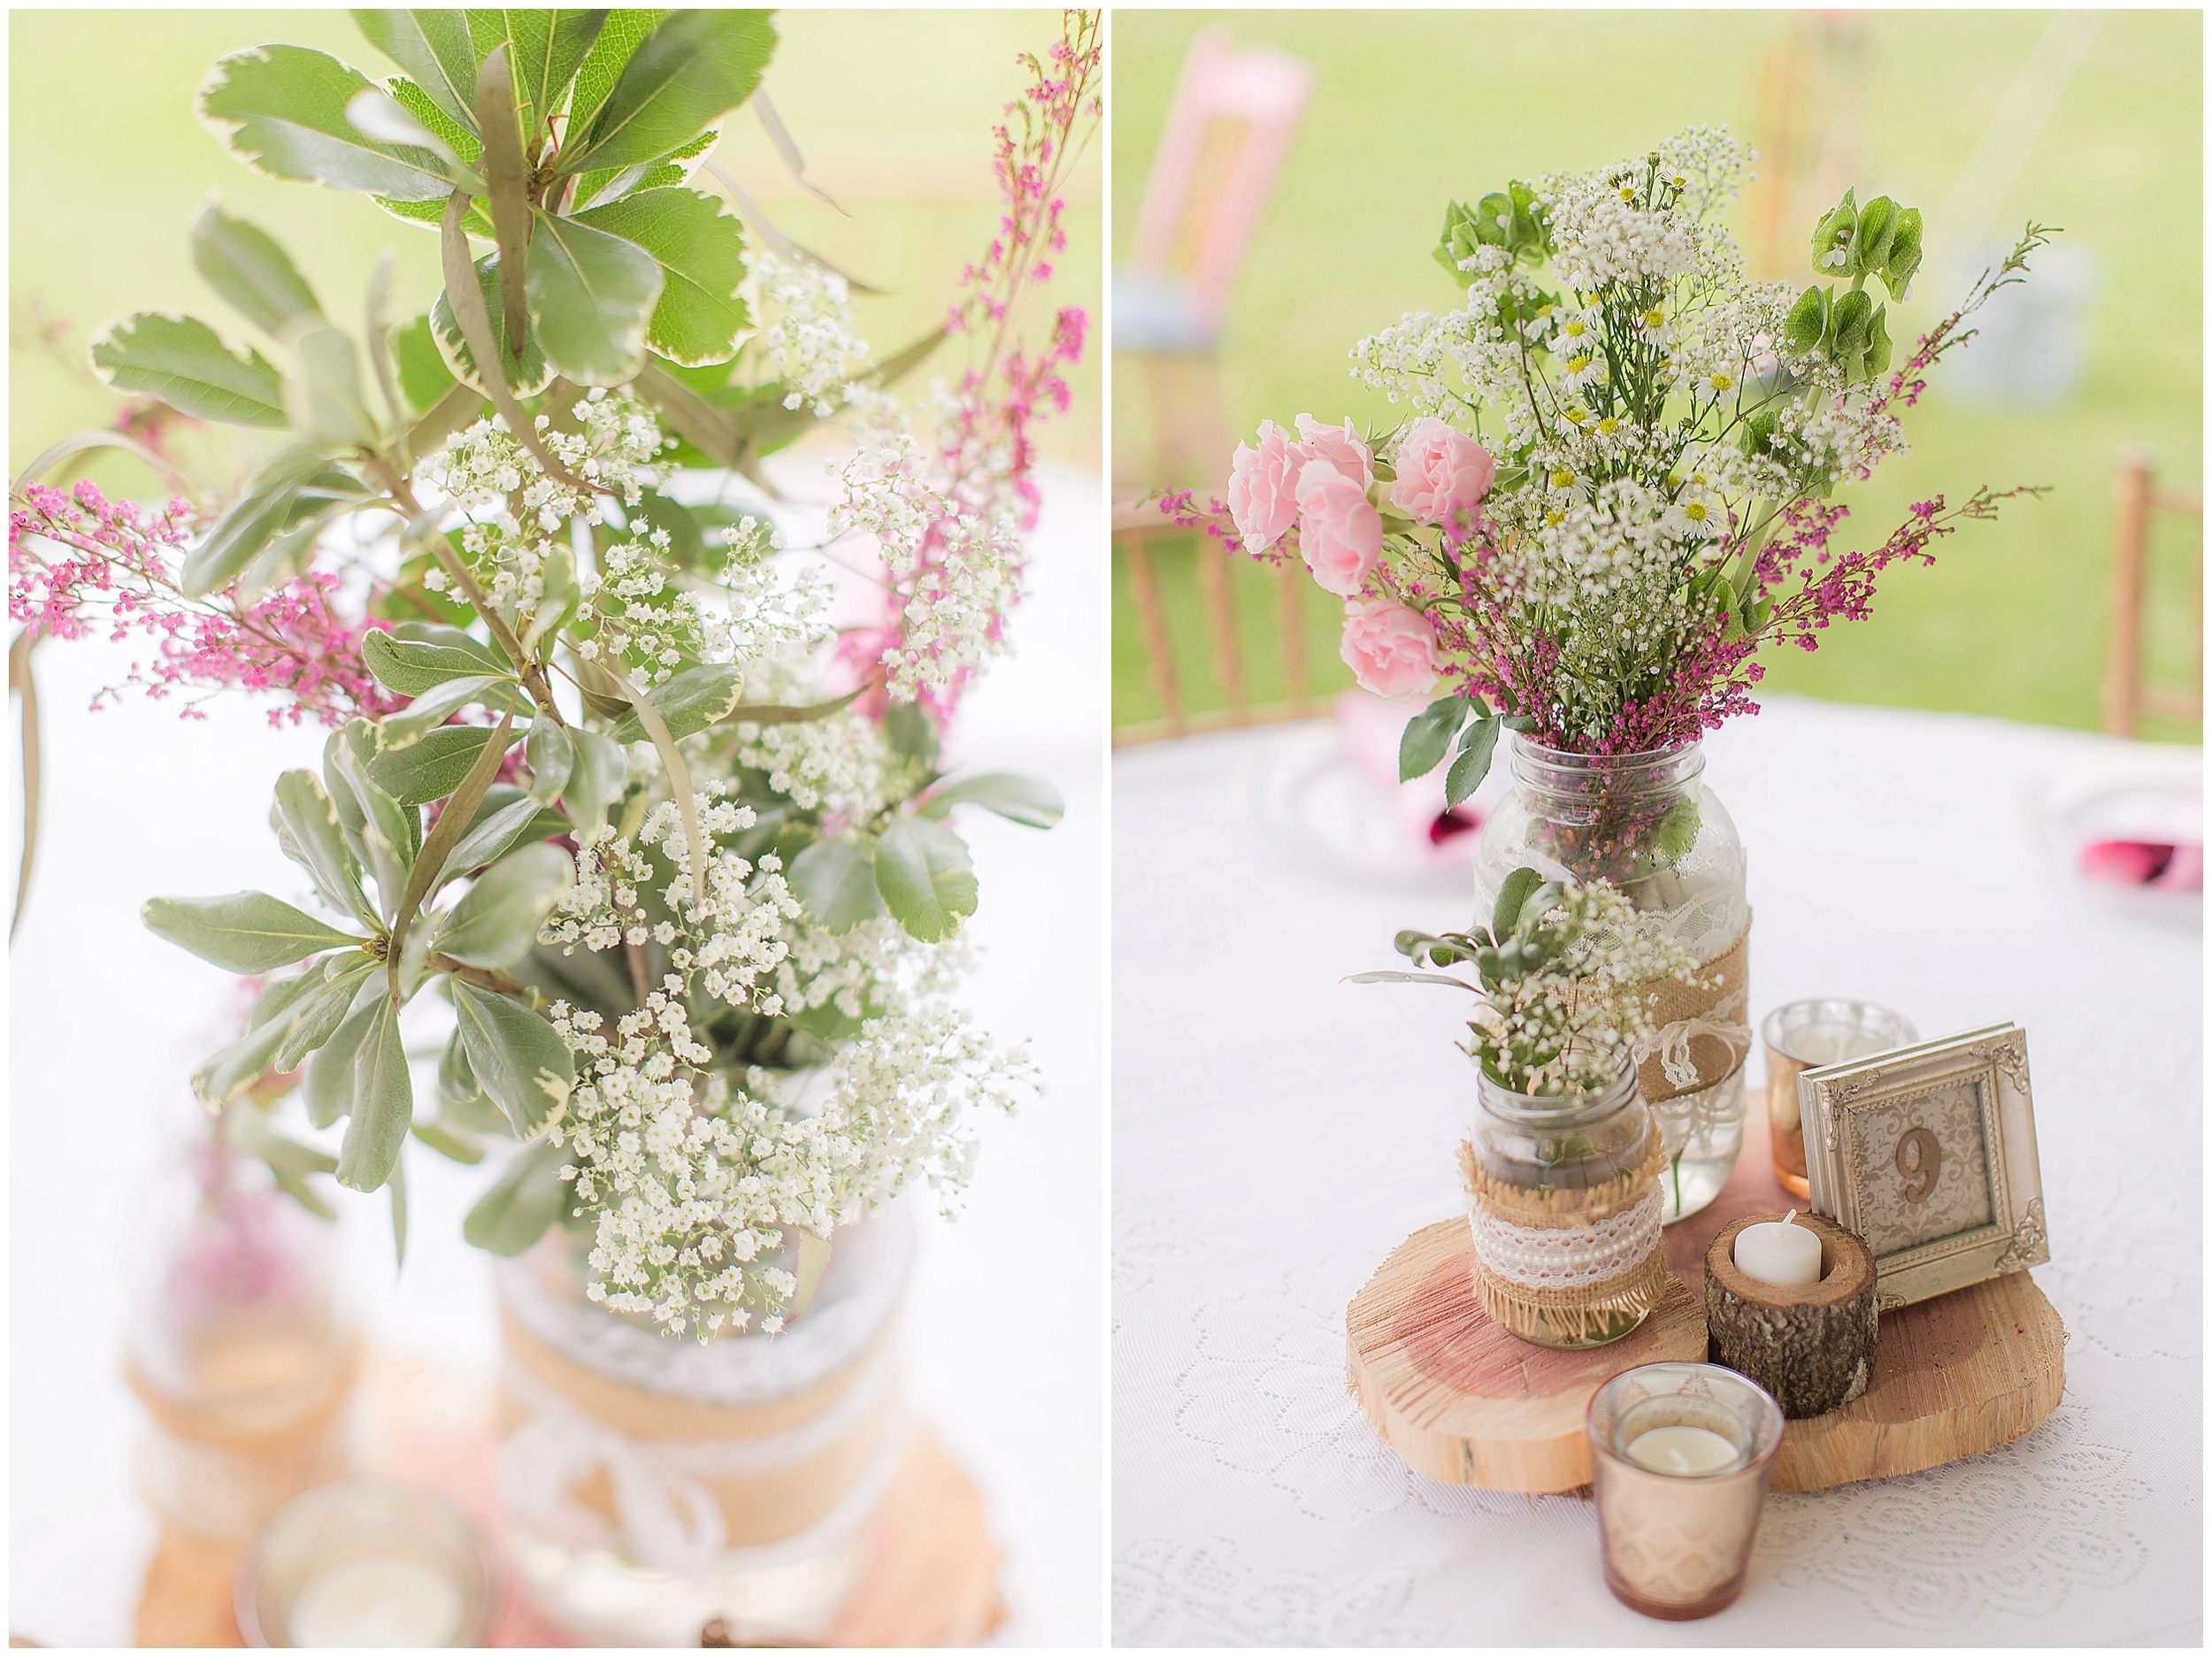 Elegant Centerpieces made with Natural Woods and Lace Accents. 